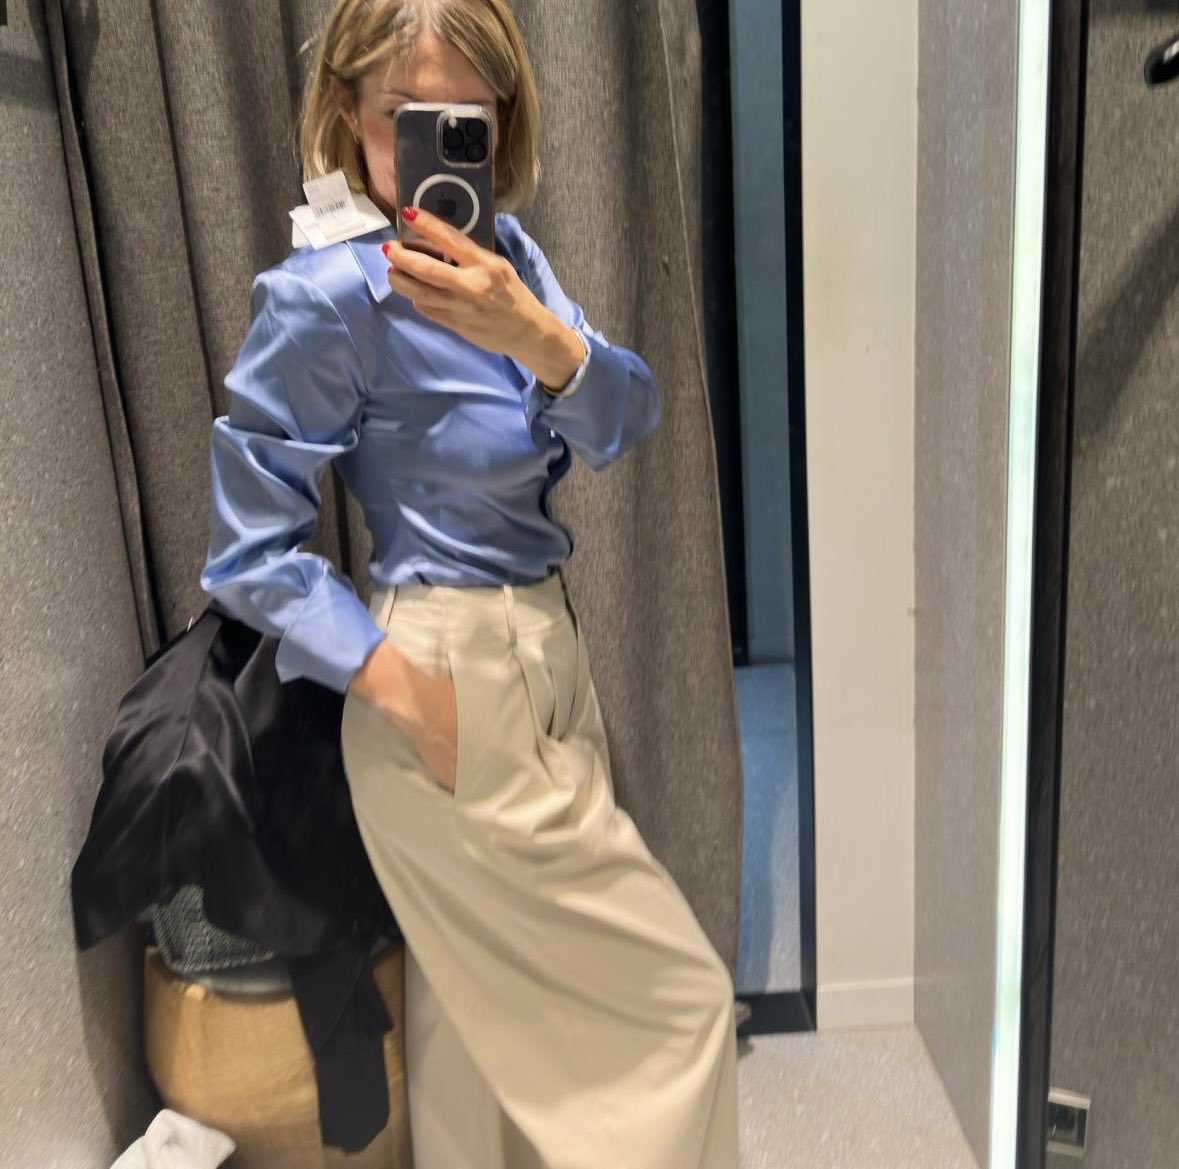 I admit I am obsessed with the Victoria Beckham collection for Mango (with everything from her…🙈), so I went back and got this super outfit for day meetings. 

For my birthday I will put a VB handbag on my Mytheresa gift card list to make the looks complete 🥰.